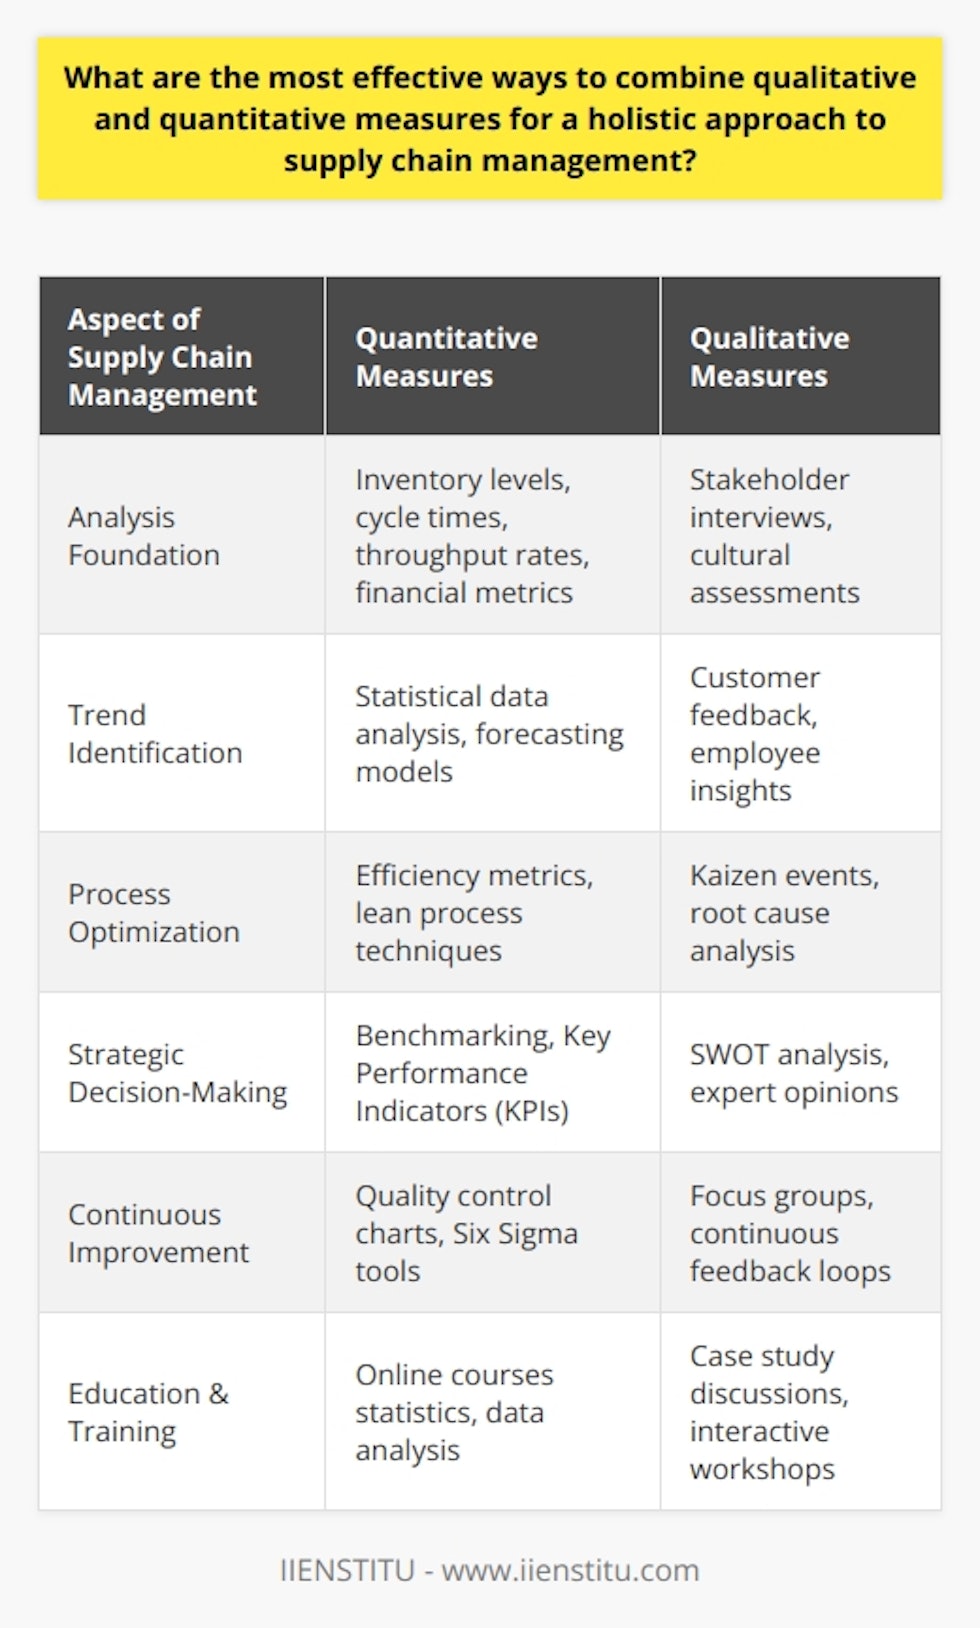 Integrating qualitative and quantitative measures is instrumental in providing a well-rounded strategy for successful supply chain management. A holistic approach to supply chain management necessitates an understanding that extends beyond mere numbers and statistics, and into the realm of the stories and contexts behind these numbers. Here's how an integration of these measures can be successfully achieved.**Quantitative Measures: The Foundation of Analysis**Quantitative measures are indispensable in evaluating and managing supply chains. They include hard data such as inventory levels, cycle times, throughput rates, and financial metrics that capture the efficiency and effectiveness of supply chain operations. This information assists in identifying trends and patterns, forecasting demands, optimizing inventory levels, and streamlining processes.**Qualitative Measures: Adding Depth to Data**To complement quantitative data, qualitative measures delve deeper into the underlying factors and subjective nuances that influence supply chain performance. These include qualitative analyses like stakeholder interviews, cultural assessments, and feedback from customers and employees. This information provides context to quantitative data, revealing the why behind the what, which can lead to better decision-making.**ADrawing a Synergistic Picture**The true power in managing supply chains comes from synthesizing quantitative and qualitative data. For instance, if quantitative data shows a delay in shipment, qualitative insights can uncover the underlying issues, such as supplier challenges or transportation disruptions. This combined understanding facilitates better strategic decisions, such as building stronger supplier relationships or investing in alternative transportation methods.For some organizations, educational platforms like IIENSTITU offer courses and resources that can provide knowledge and training on effectively combining quantitative and qualitative research techniques. A thorough understanding of both methods, and ongoing learning about their integration, is key for maintaining a resilient and responsive supply chain.**Conclusion: The Integrated Model**The most effective supply chain management strategy incorporates both types of measures, offering a dynamic view that captures the multifaceted nature of supply chain operations. Quantitative data brings precision and measurement, while qualitative insights add meaning and context. In the face of global complexities and market fluctuations, combined approaches in supply chain management not only provide a clear picture of current performance but also prepare businesses to anticipate and navigate future challenges.